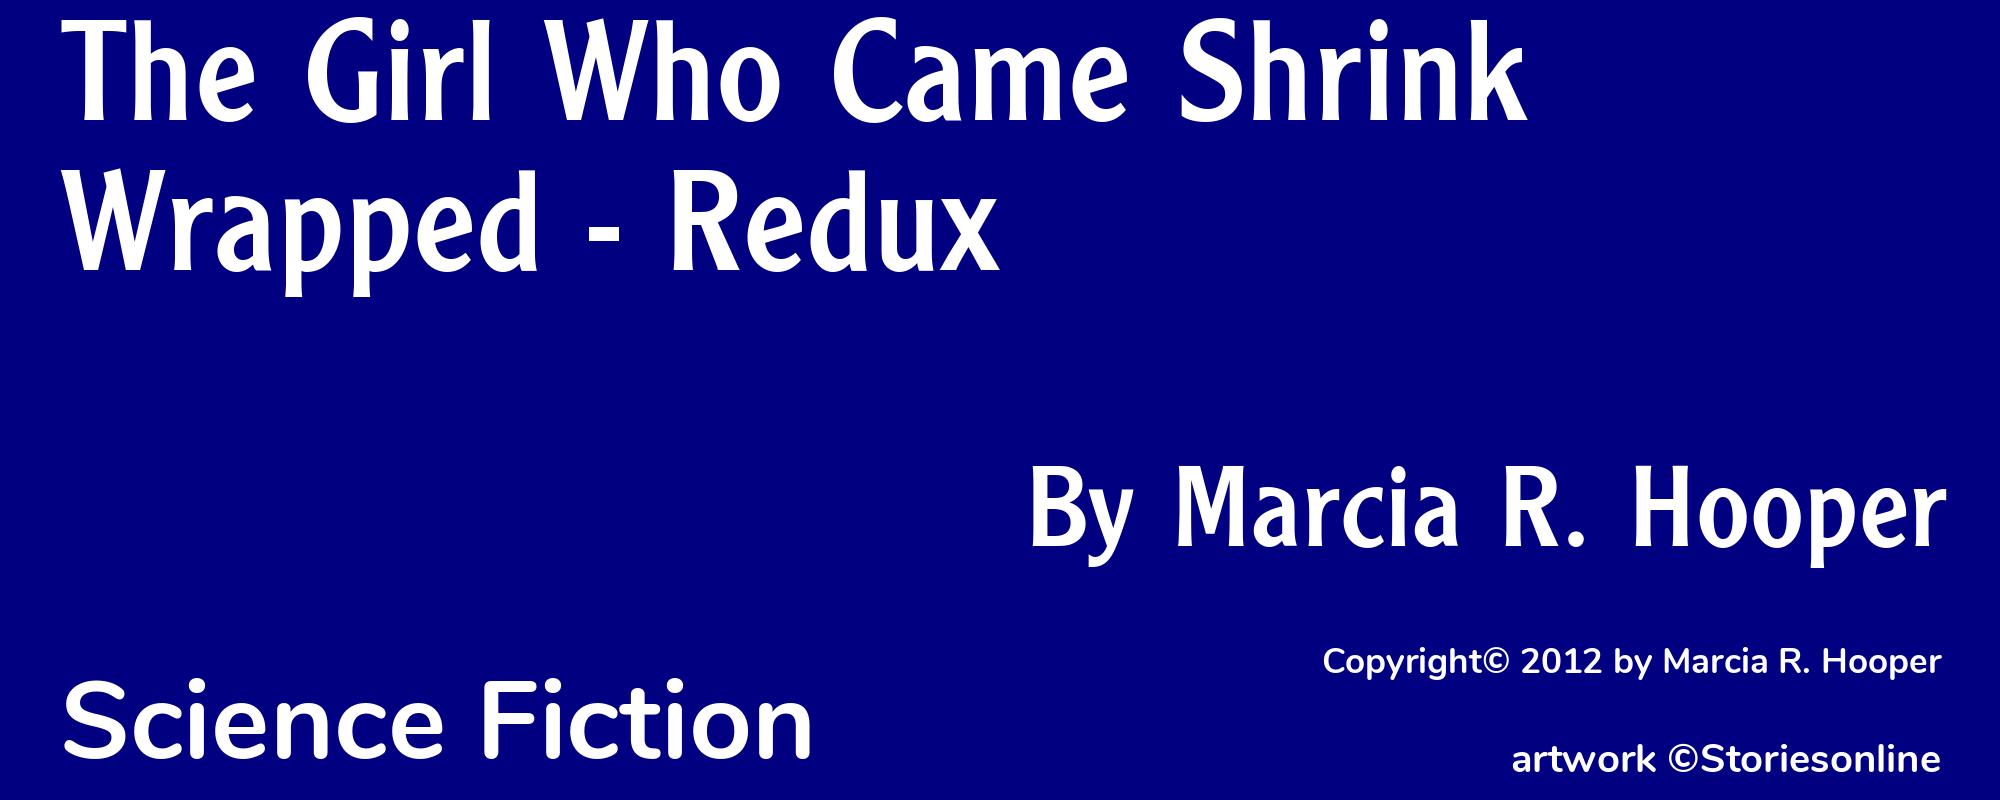 The Girl Who Came Shrink Wrapped - Redux - Cover